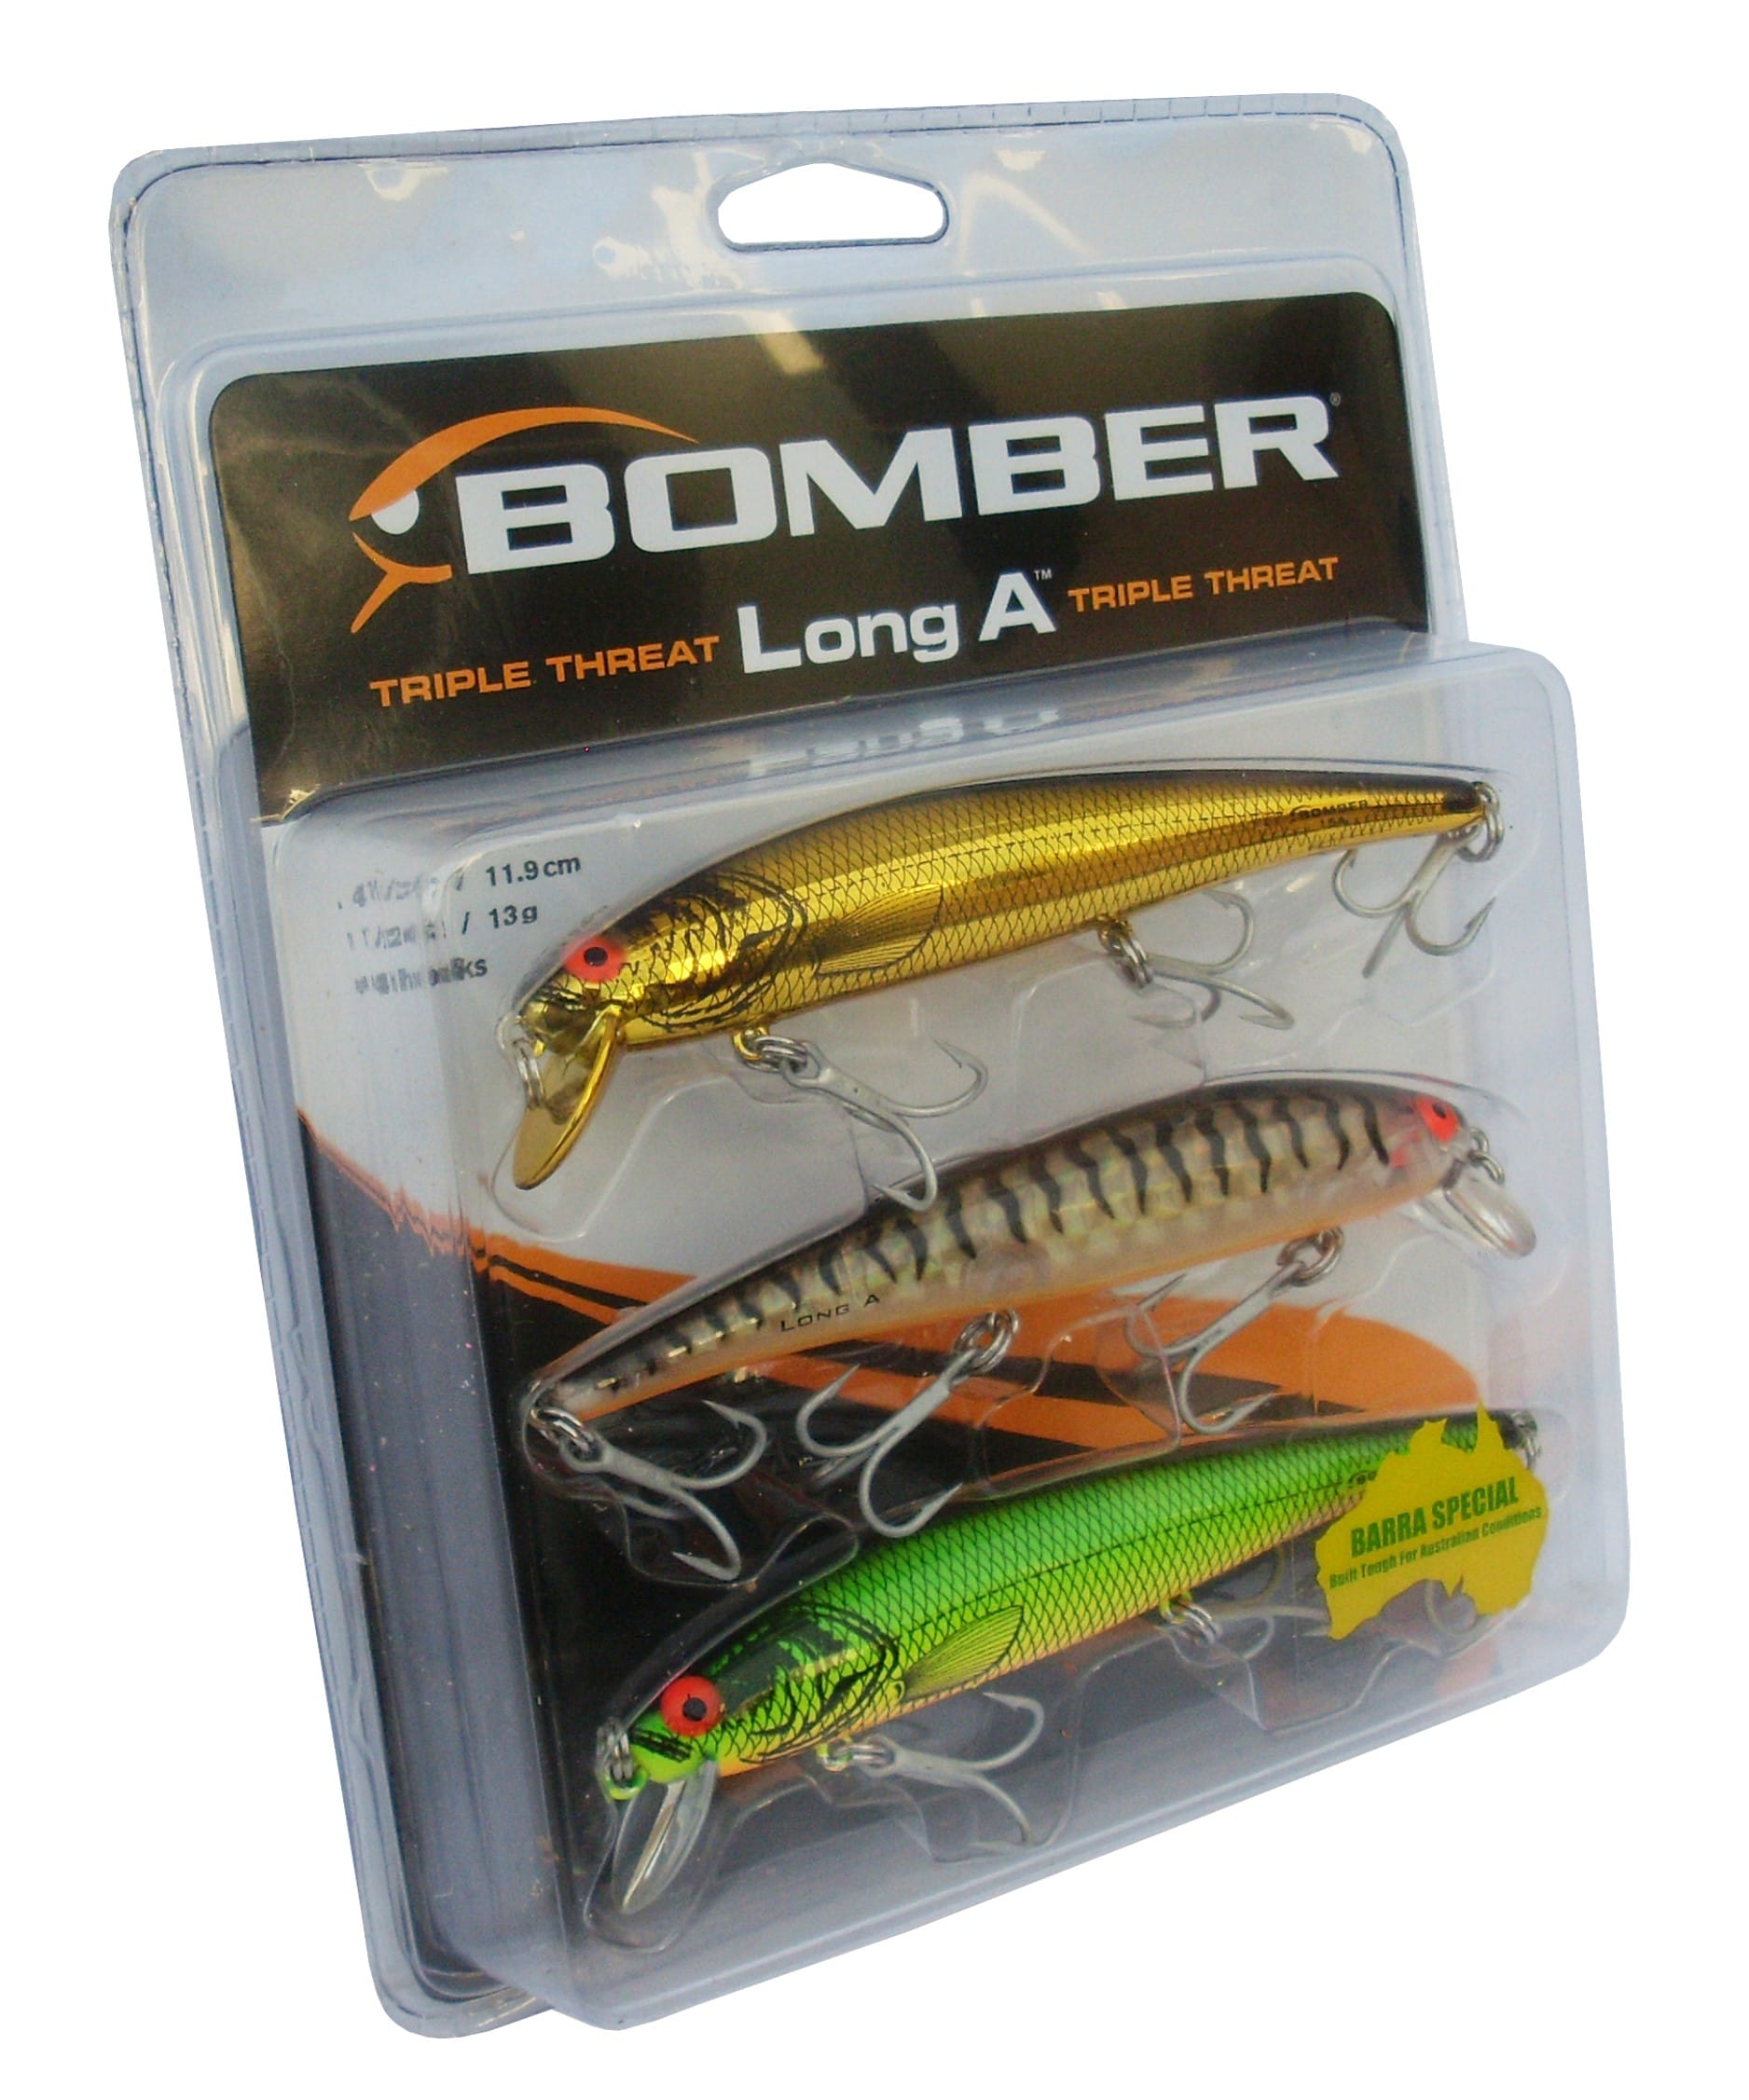 Bomber Long 15A Tripple Pack 7 (Colours: XMKOHD, GPTBRO and XM7HD)